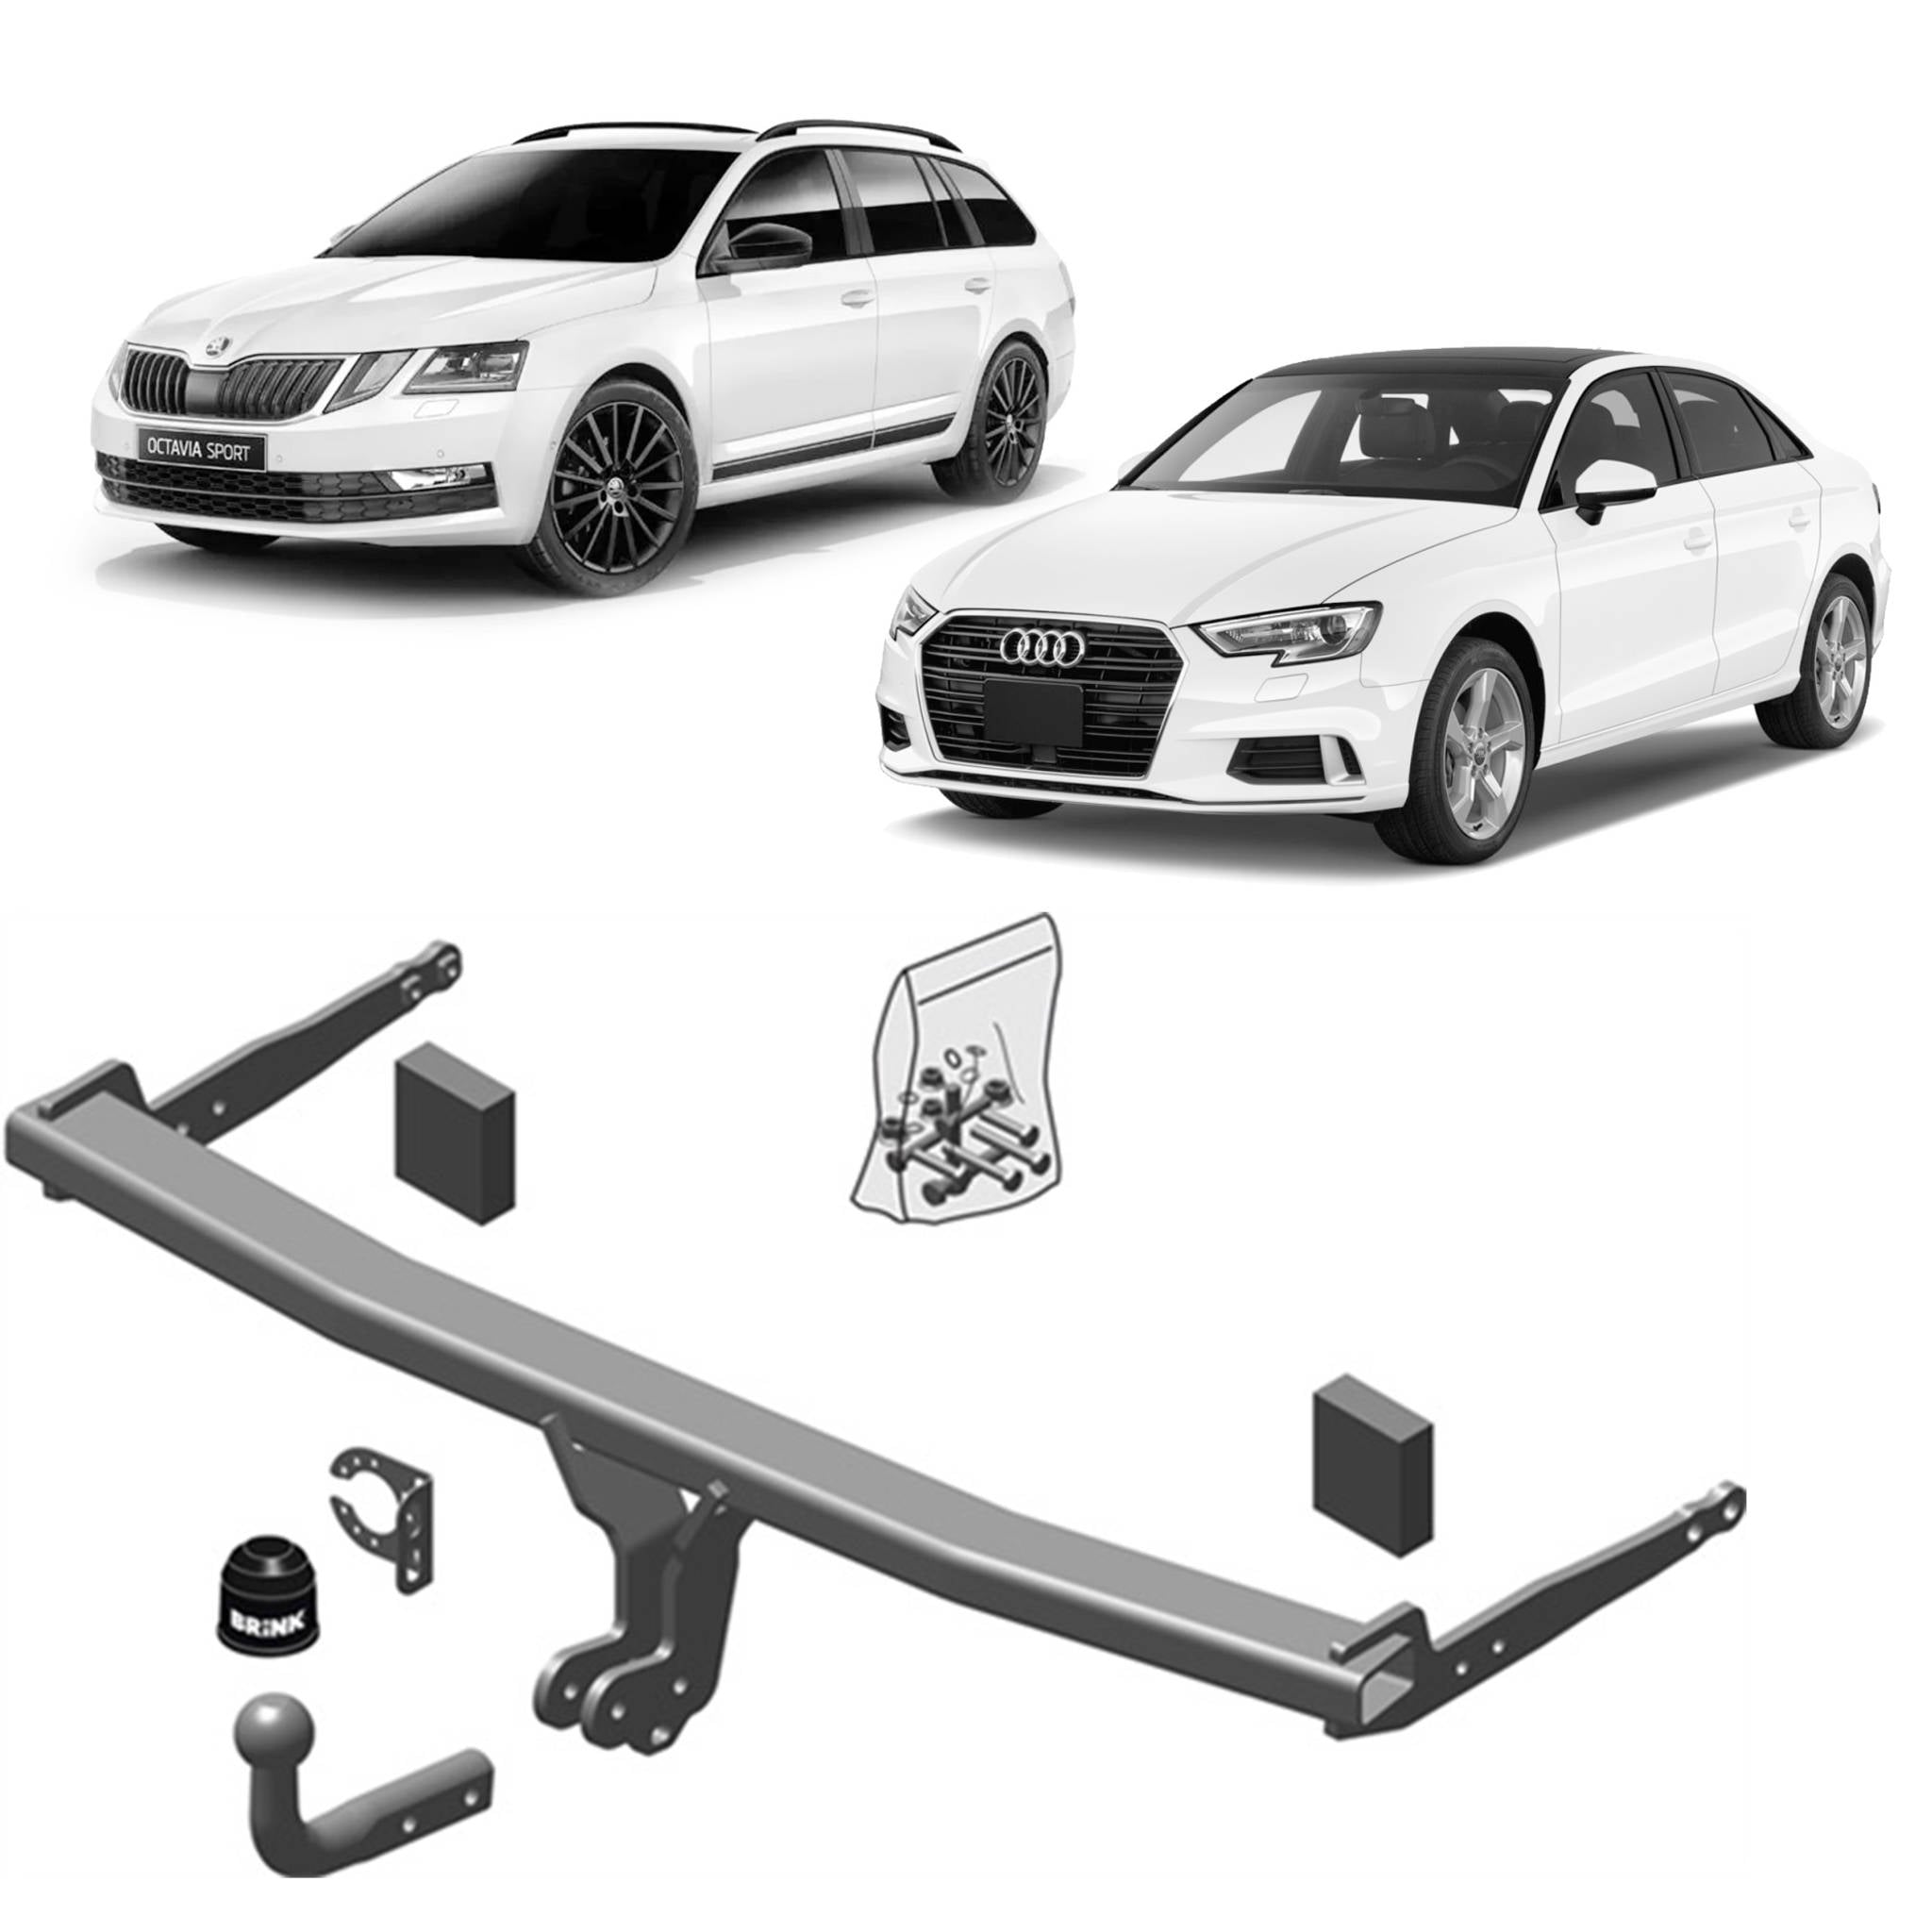 Brink Towbar for Audi A3 (09/2012 - 02/2020), RS3 (04/2017 - 02/2020), Volkswagen Golf (01/2012 - on), Skoda Octavia (11/2012 - 03/2020), Skoda Octavia (08/2013 - 12/2019), Audi A3 (02/2013 - 06/2016), Audi A3 (10/2013 - 06/2016), RS3 (04/2017 - 06/2016)